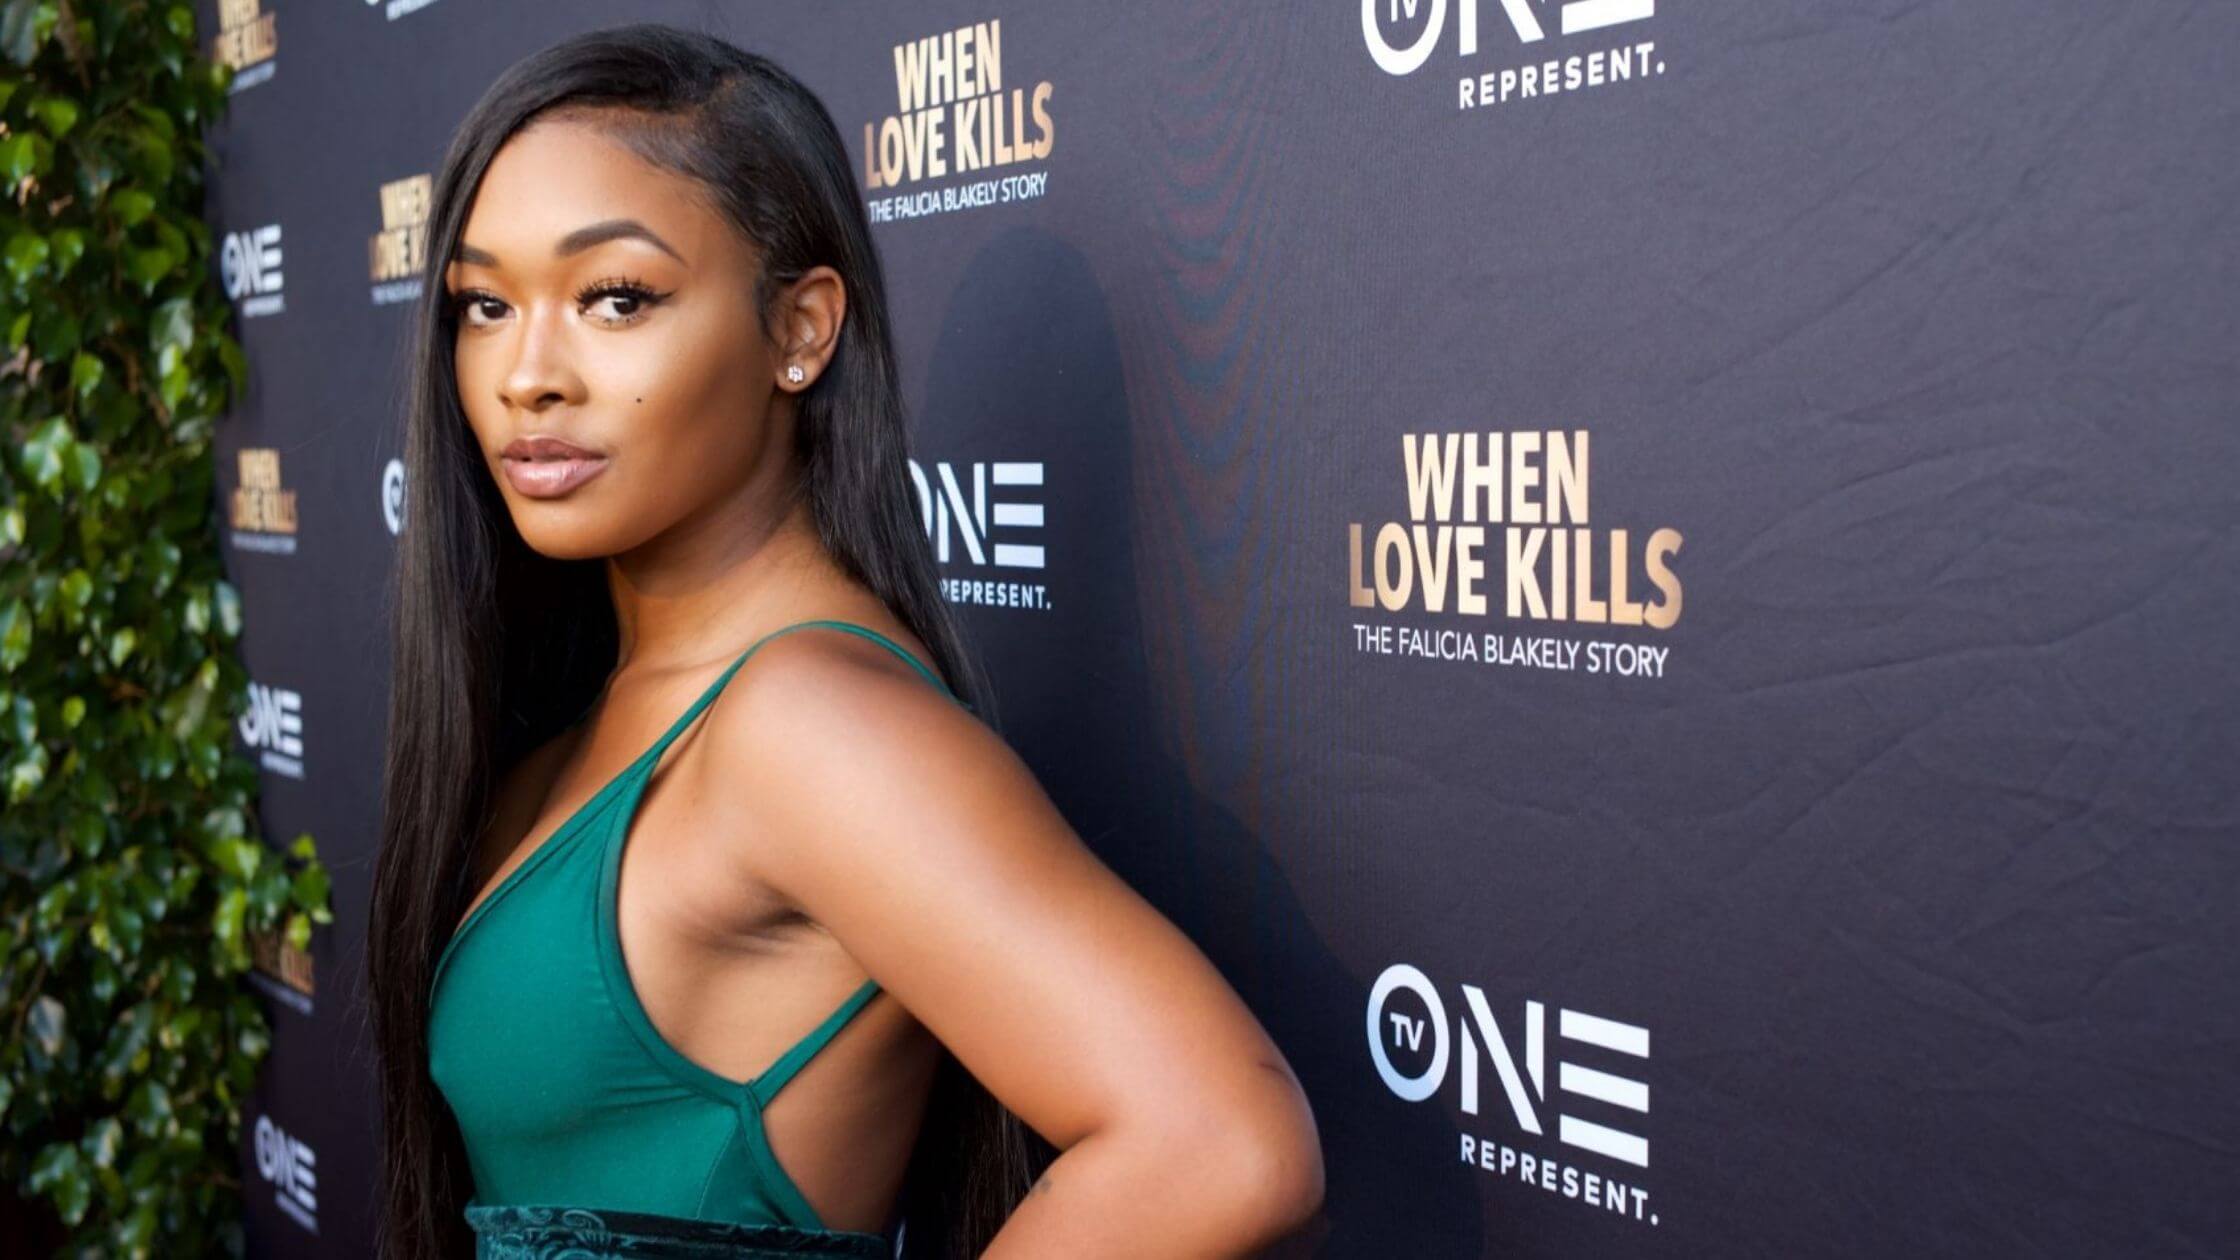 Miracle Watts's Age, Net Worth, Weight, Biography